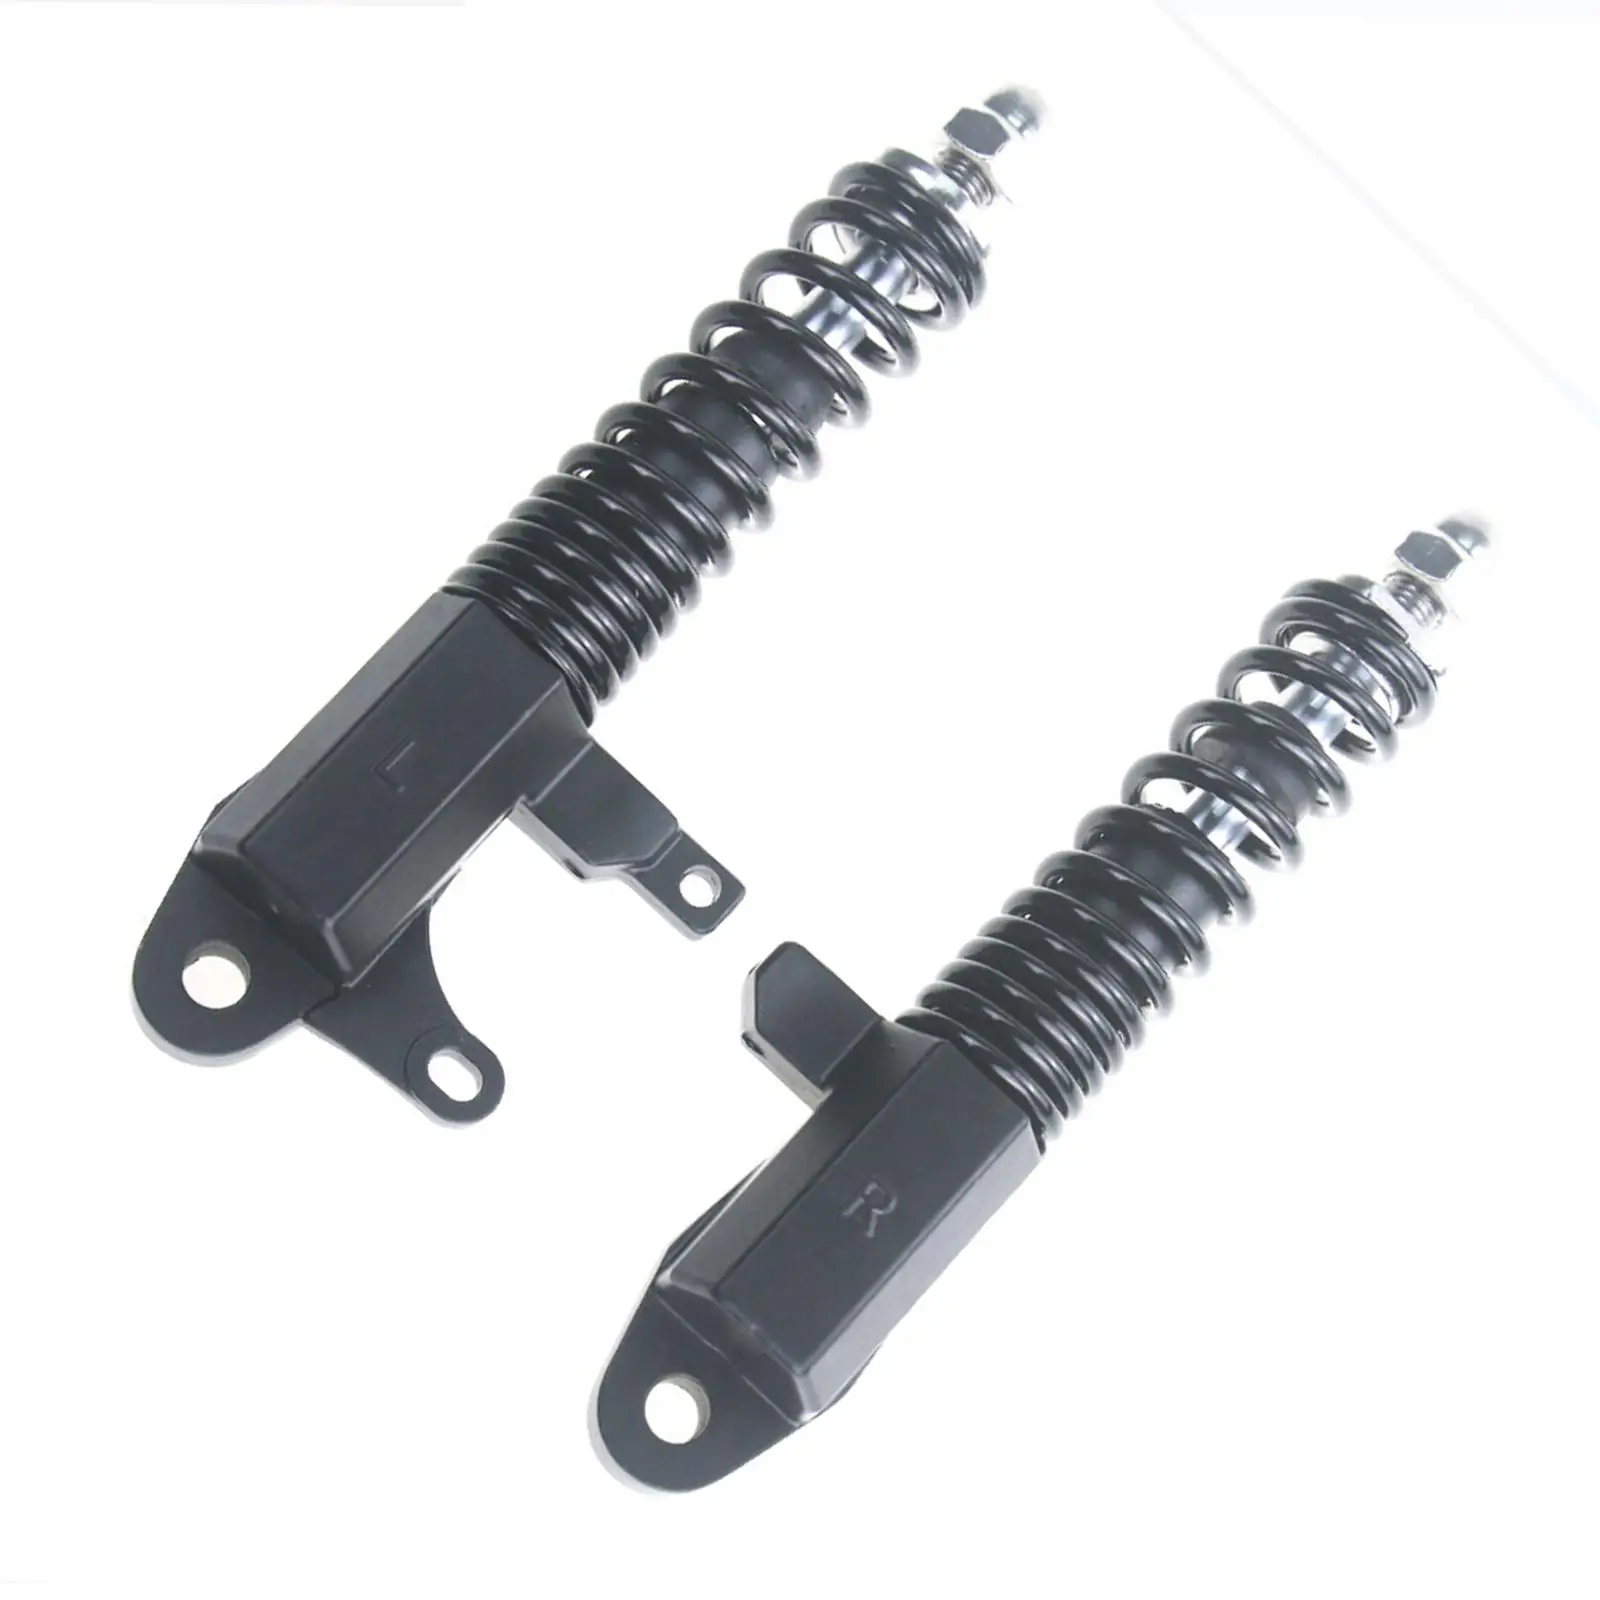 2x Front Fork Shock Absorber 10inch Premium Reduce Noise Aluminum Alloy Cycling Parts Front Black for Kugoo M4 Pro